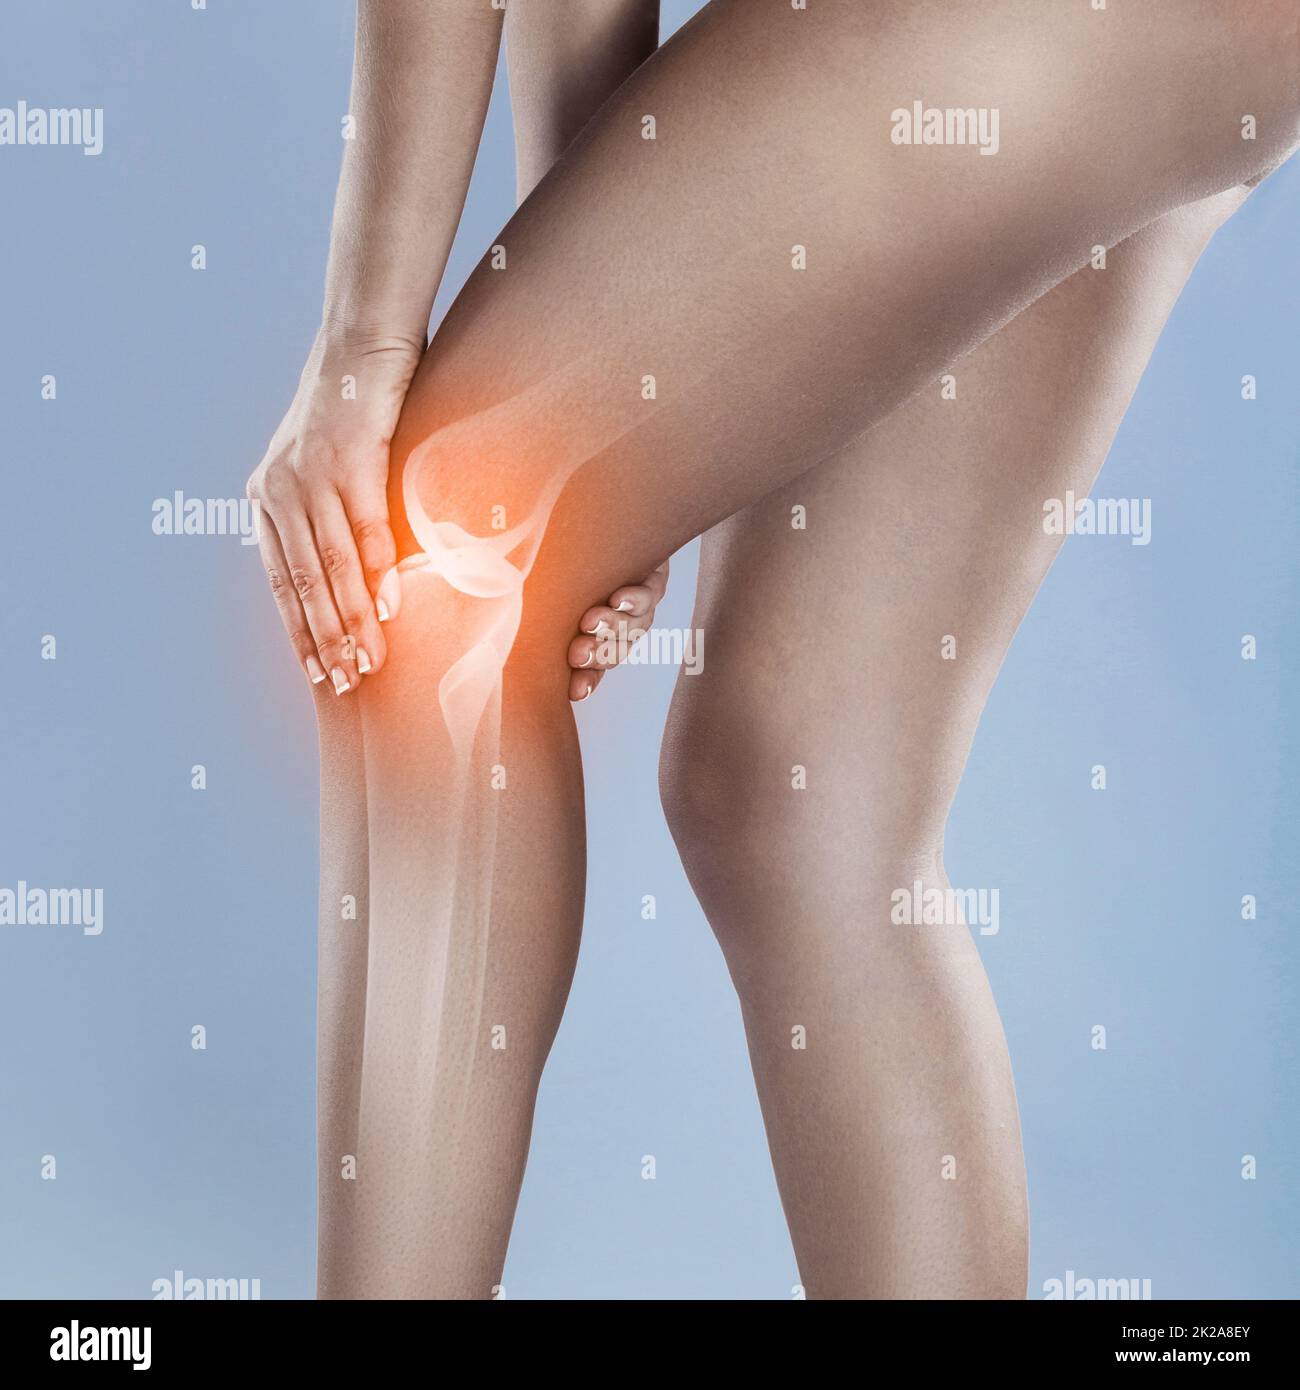 Knee injuries can linger. Concept shot of a woman with a painful knee joint. Stock Photo